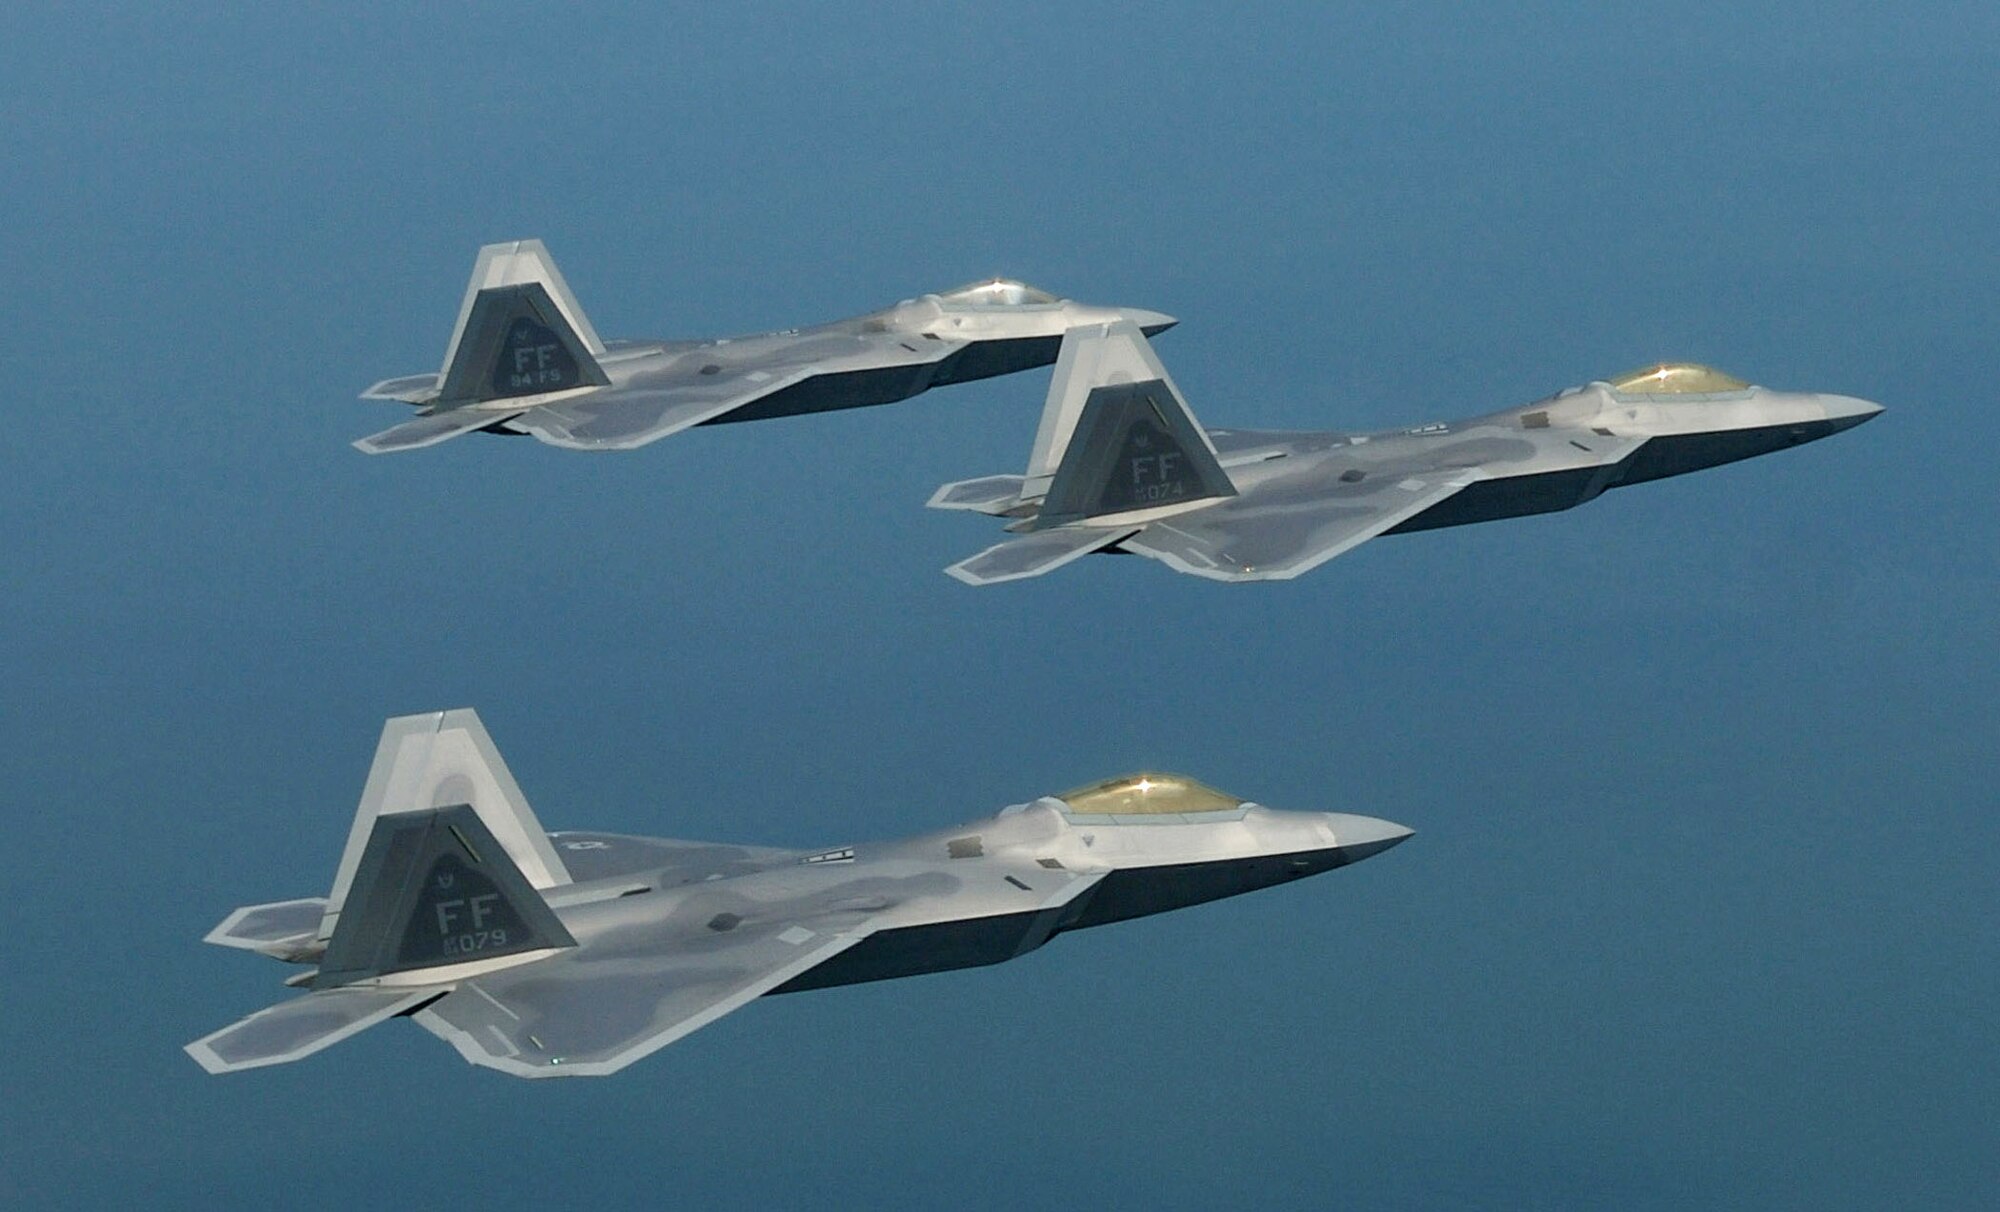 F-22 Raptors fly in formation. Air turbines used in the F-22s are now serviced by the 550th Commodities Maintenance Squadron at Tinker Air Force Base, Okla., as part of a new cooperative agreement with private manufacturers Lockheed Martin and Honeywell. The squadron will maintain more than 30 components from the high-tech air superiority fighter. (U.S. Air Force photo/Staff Sgt. Samuel Rogers) 
